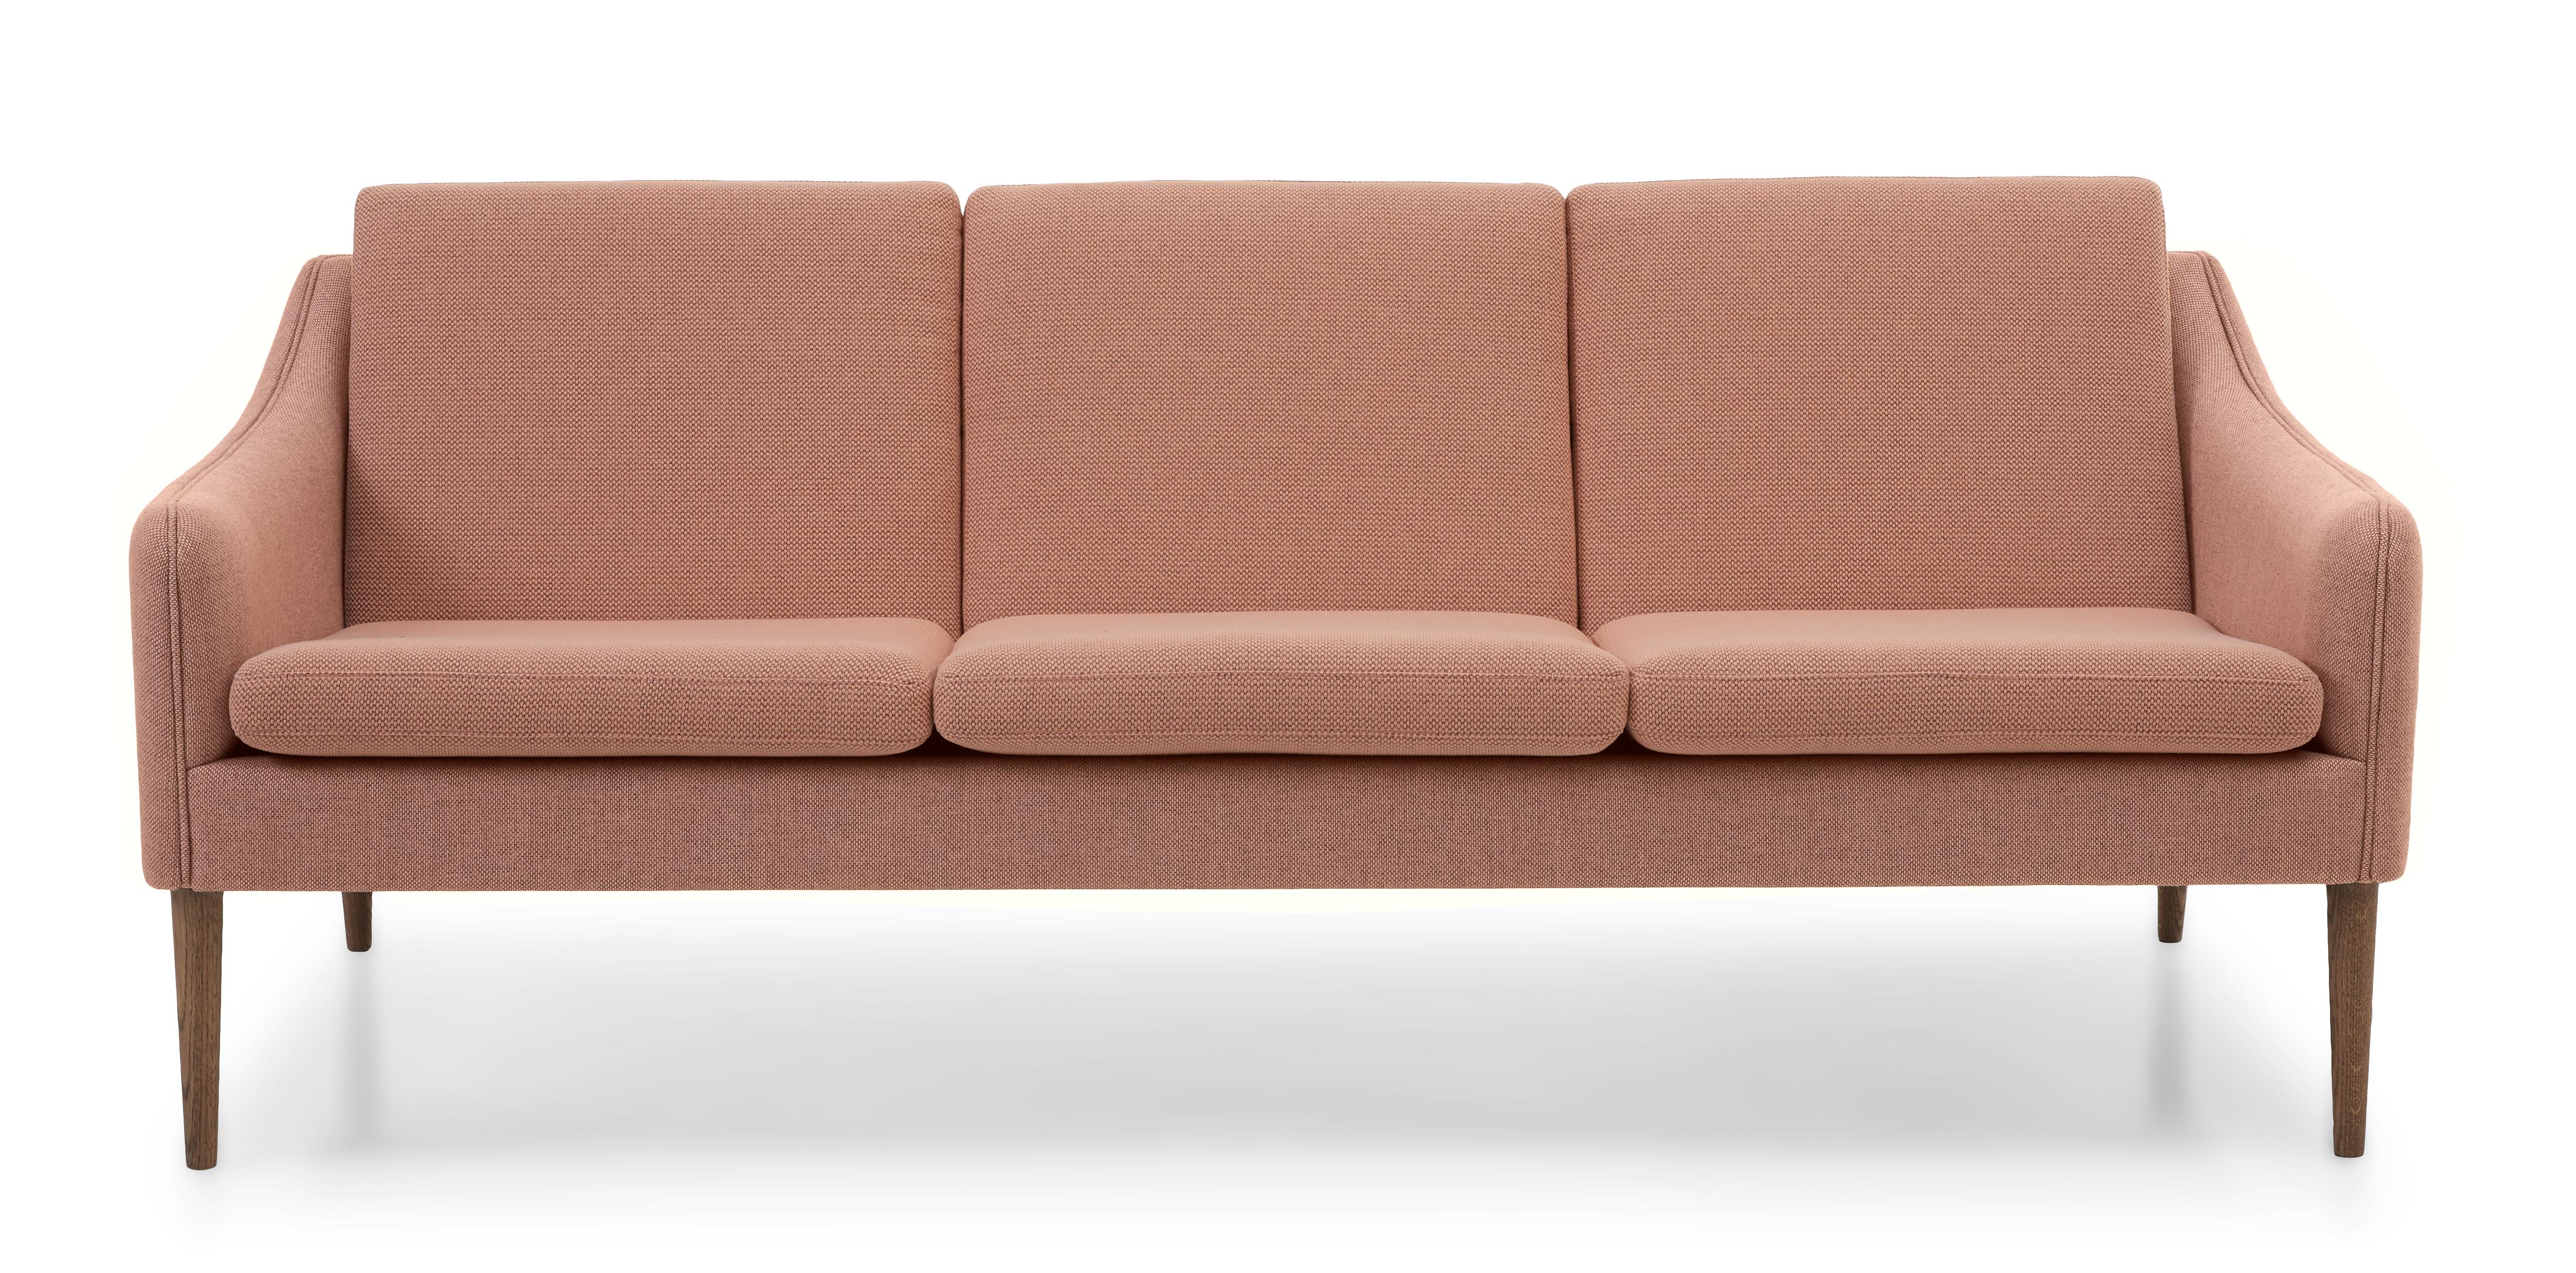 For Sale: Pink (Merit 035) Mr. Olsen 3-Seat Sofa with Smoked Oak Legs, by Hans Olsen from Warm Nordic